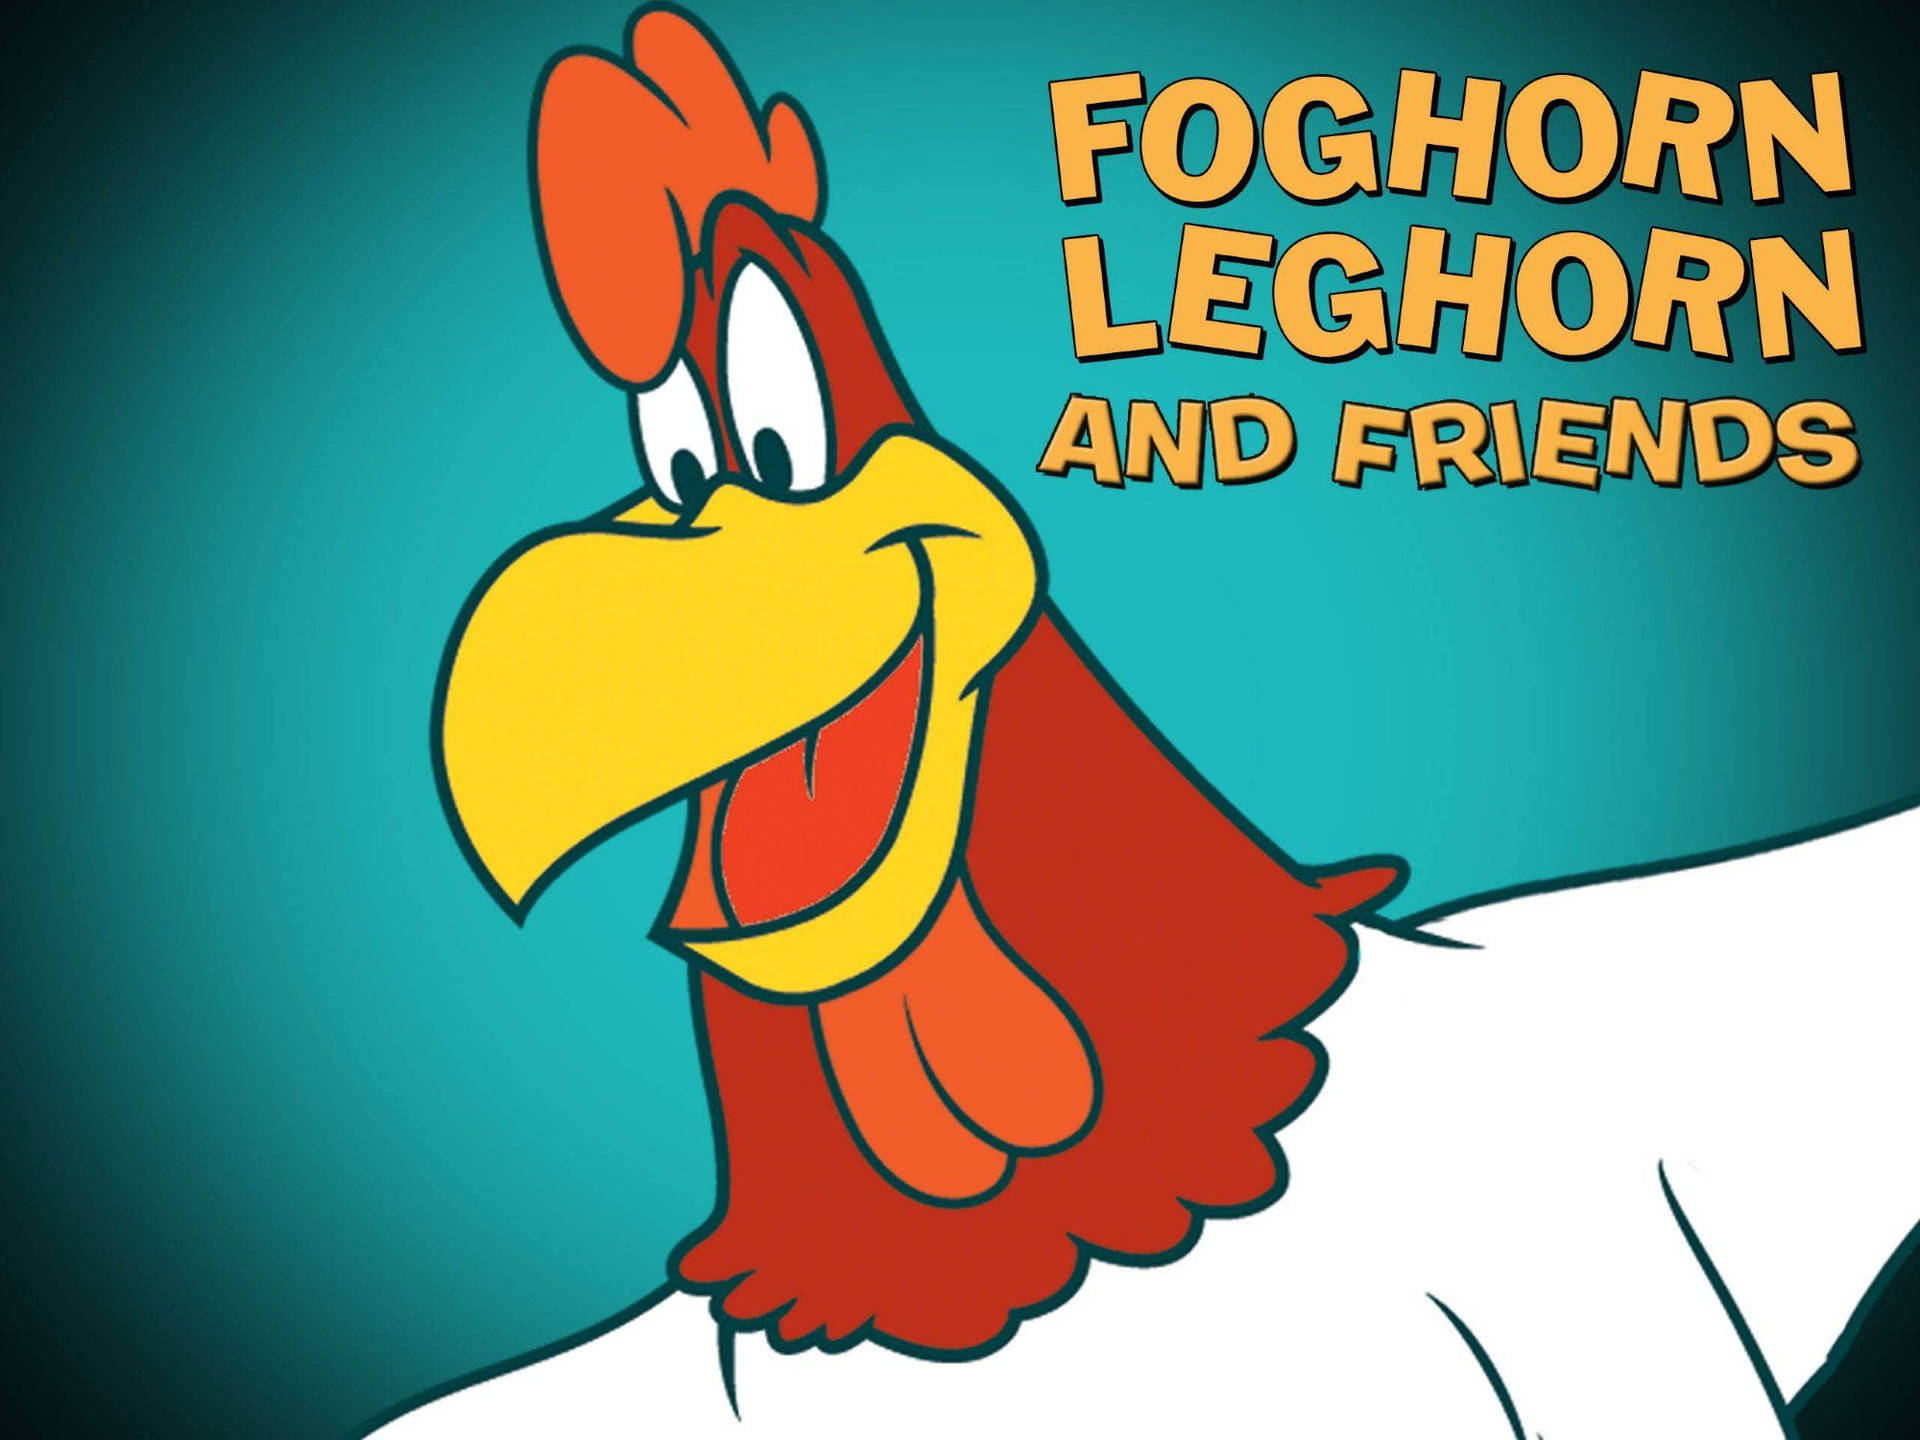 Foghorn Leghorn, a Looney Tunes icon, cracks us up every time! Wallpaper